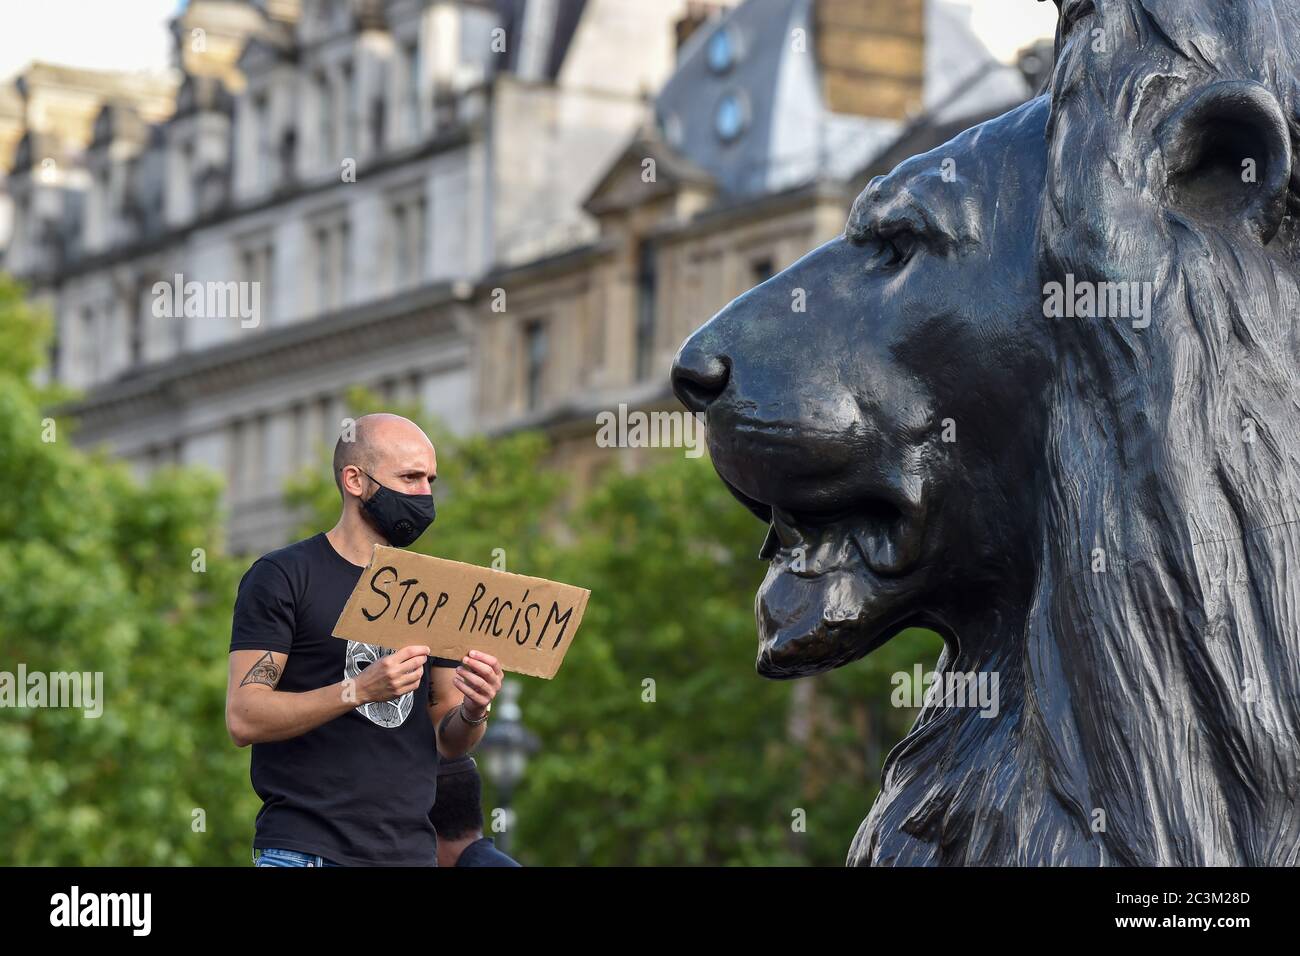 London, UK. 20th June, 2020. A protester holds a placard that says Stop Racism while standing on one of the Lion statues in Trafalgar Square during the Black Lives Matter protest.Black Lives Matter protests continue in the United Kingdom after the death of George Floyd killed by a police officer in Minneapolis. Credit: SOPA Images Limited/Alamy Live News Stock Photo